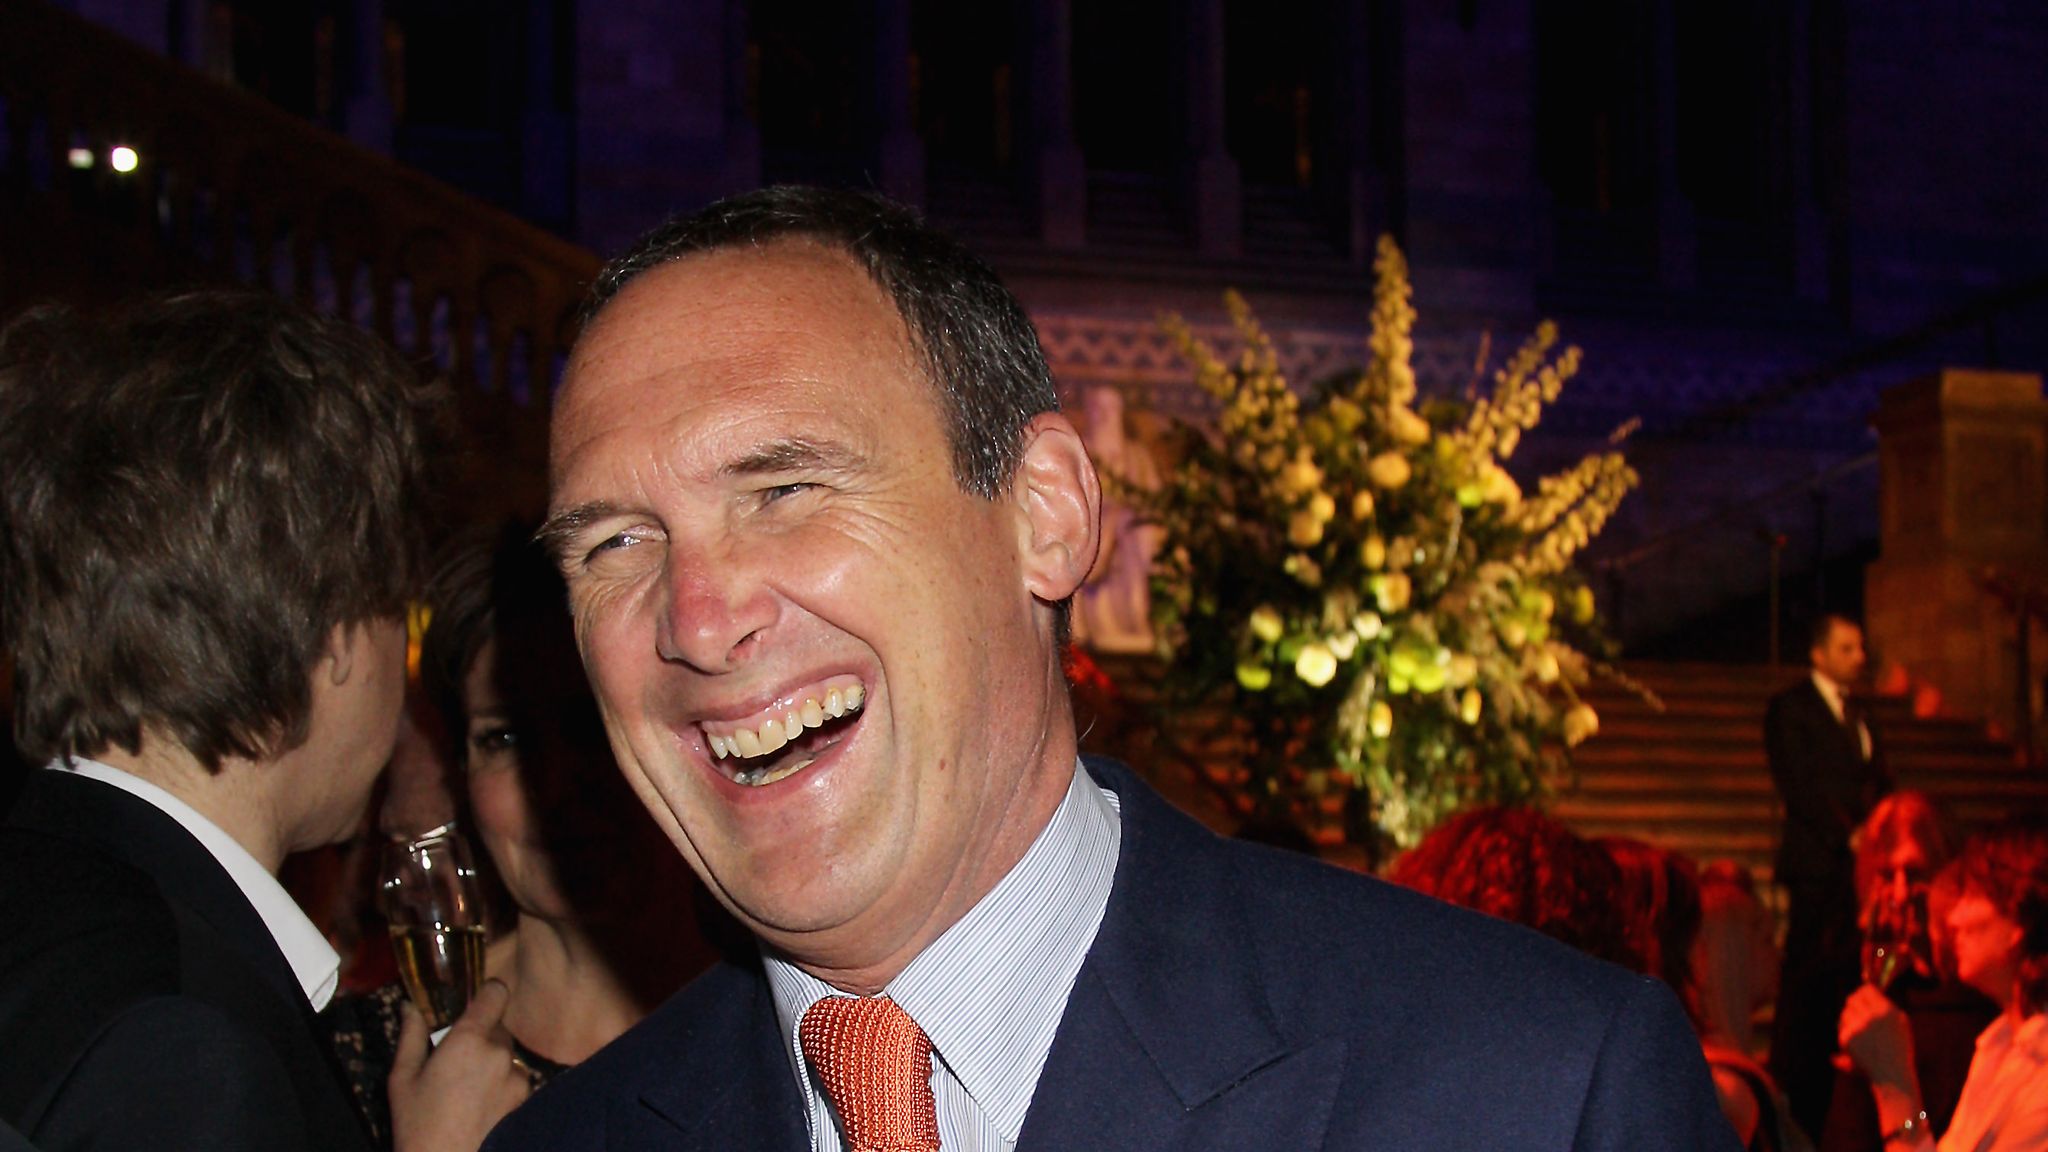 Restaurant Critic Aa Gill Dies Aged 62 After Short Fight With Cancer Uk News Sky News